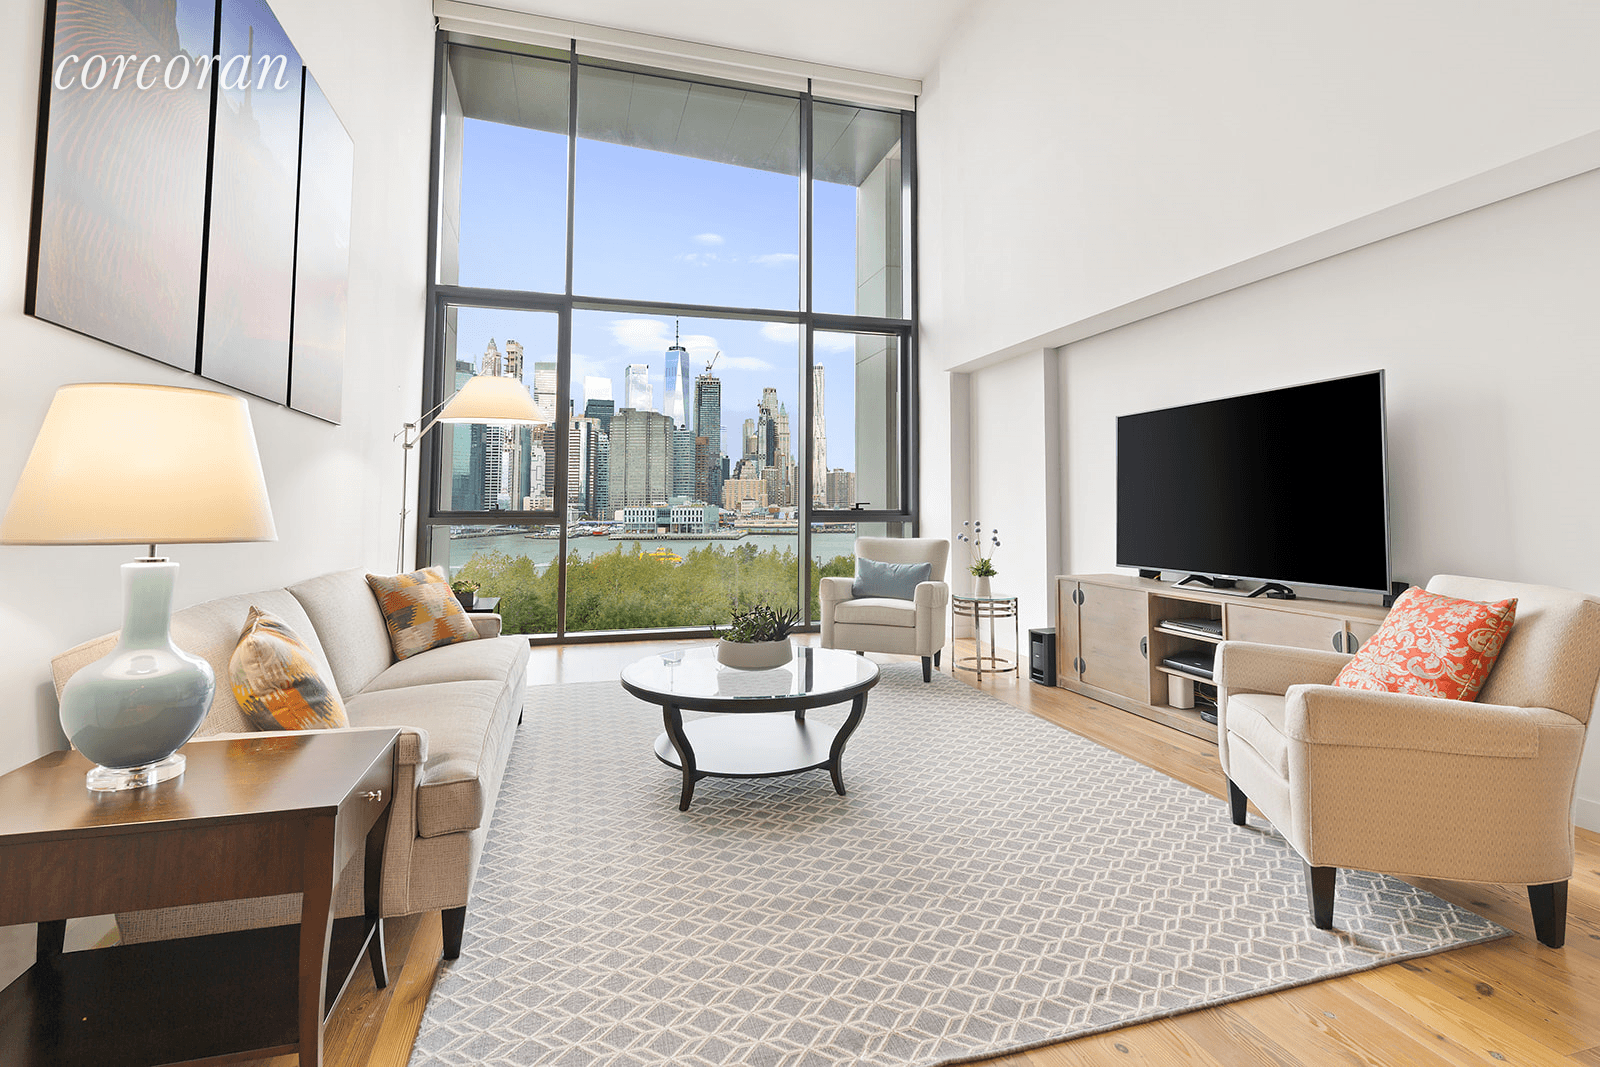 This magnificent high floor unit in the coveted North building at Pierhouse is a loft like 1612 SF 1 bedroom PLUS home office with unrivaled water, park and Manhattan views.